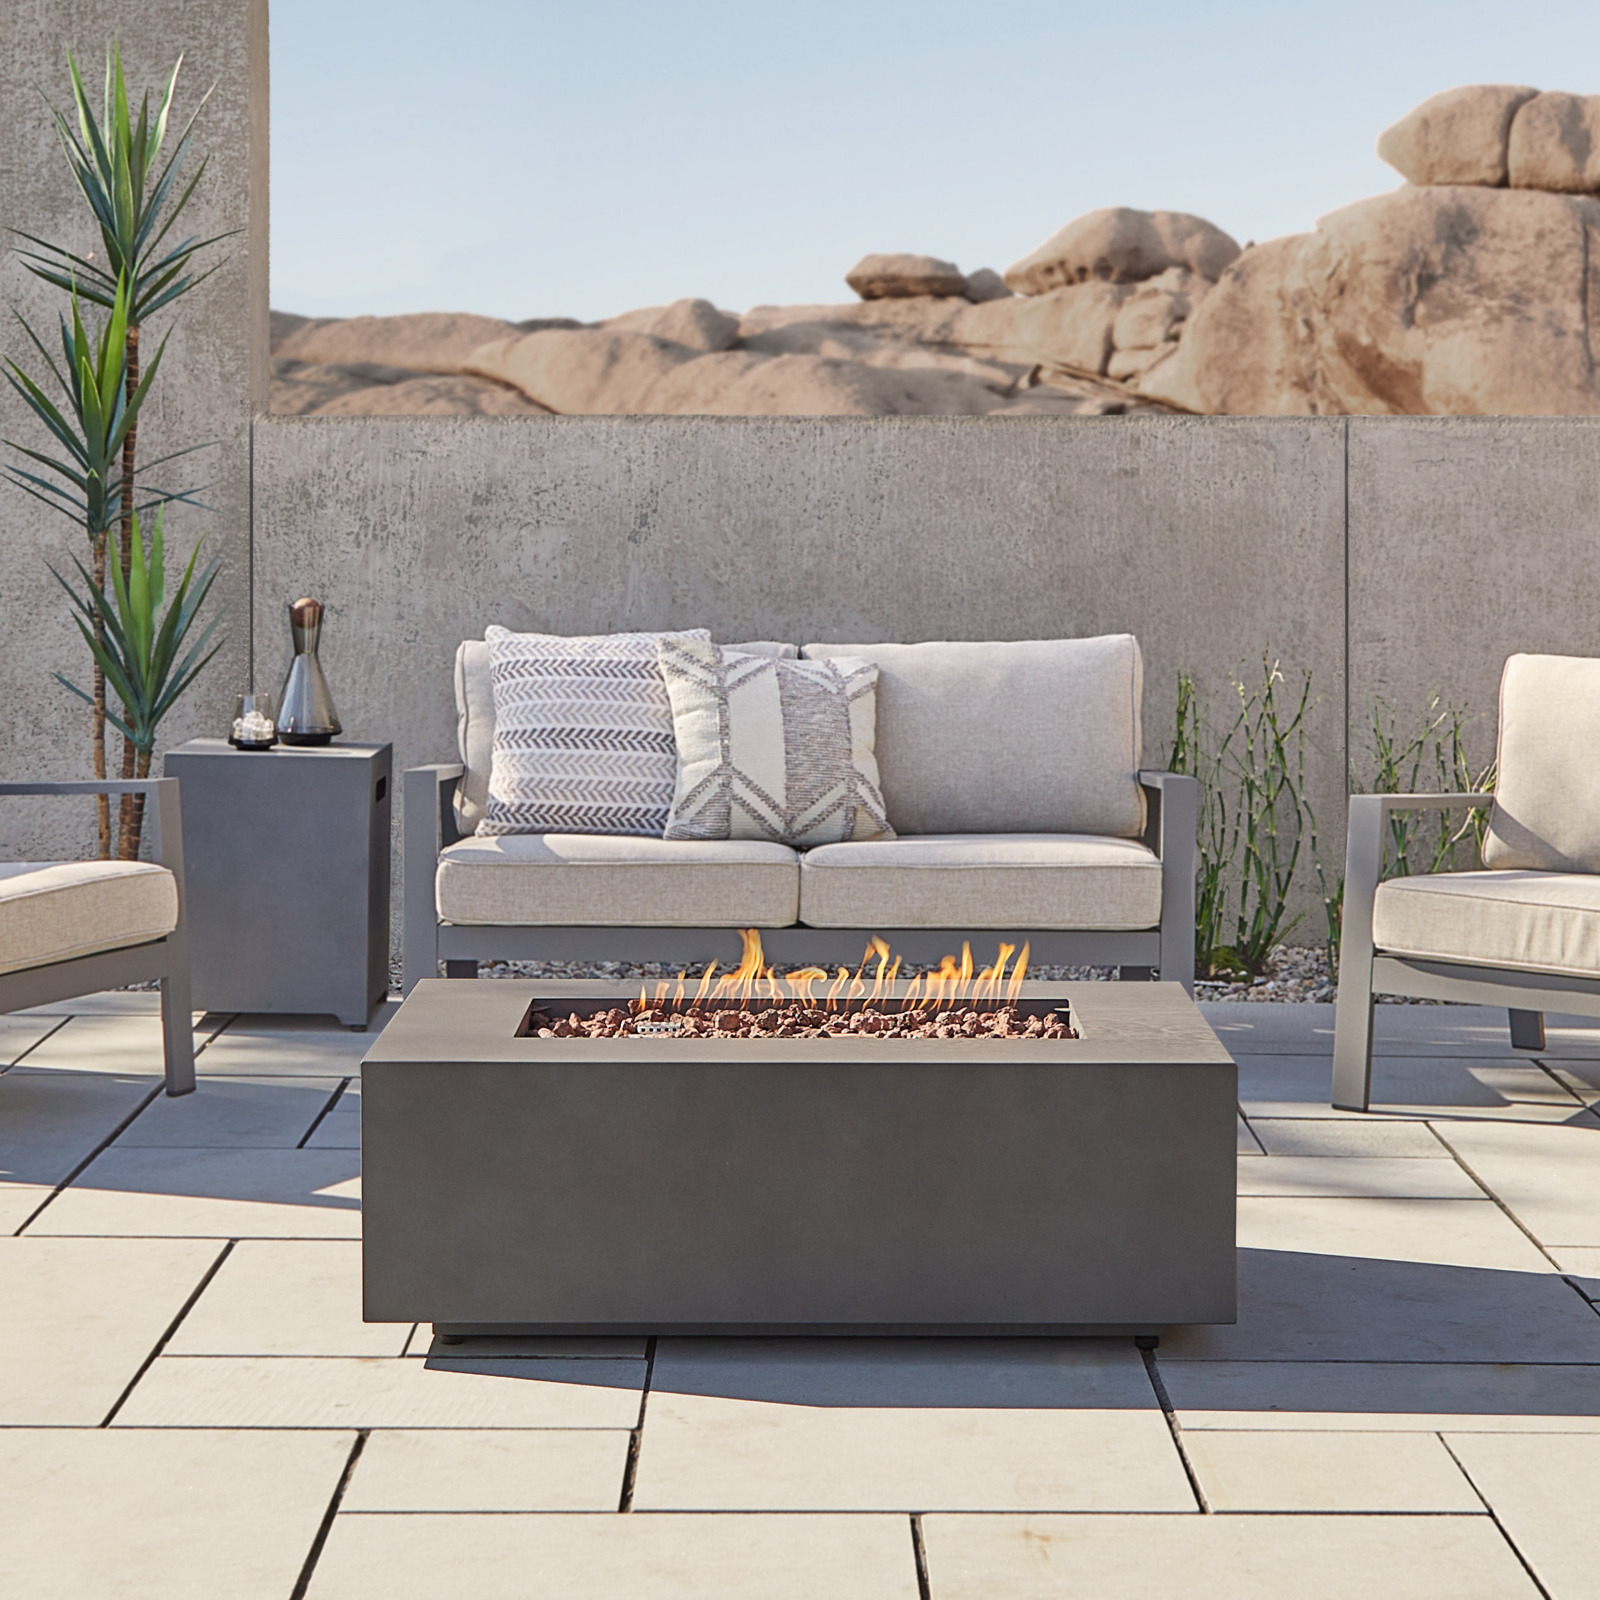 Aegean 42" Rectangle Propane Fire Pit Outdoor Fireplace Fire Table for Backyard or Patio